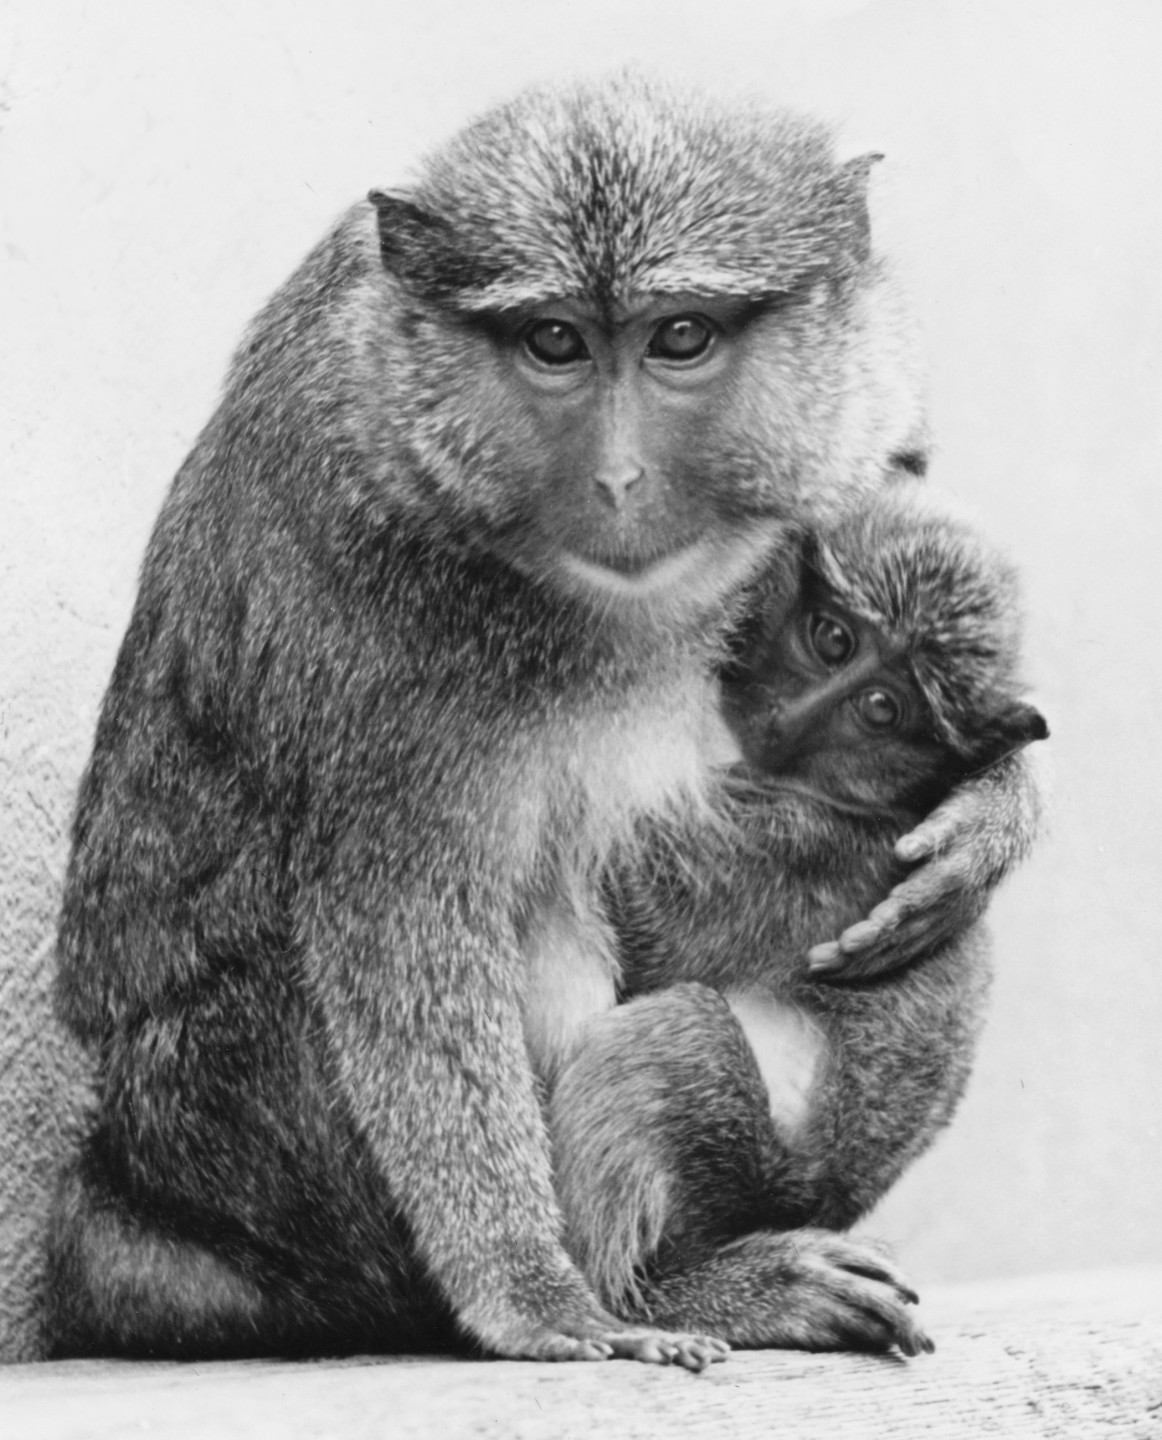 Not much was known about the Allen's swamp monkey in the 1950s, so the Zoo was excited to receive a young pair in 1953, the first in a U.S. zoo. That excitement was doubled on June 10, 1959, when a baby was born, the first birth of the species in the U.S. Mammal curator George Pournelle noted that the baby grew quickly, and that by 10 weeks of age he was eating bits of his mother's food. The staff was also interested to see that reports of this species liking water and swimming were true—a large tub of water was eagerly used for splashing and dunking.